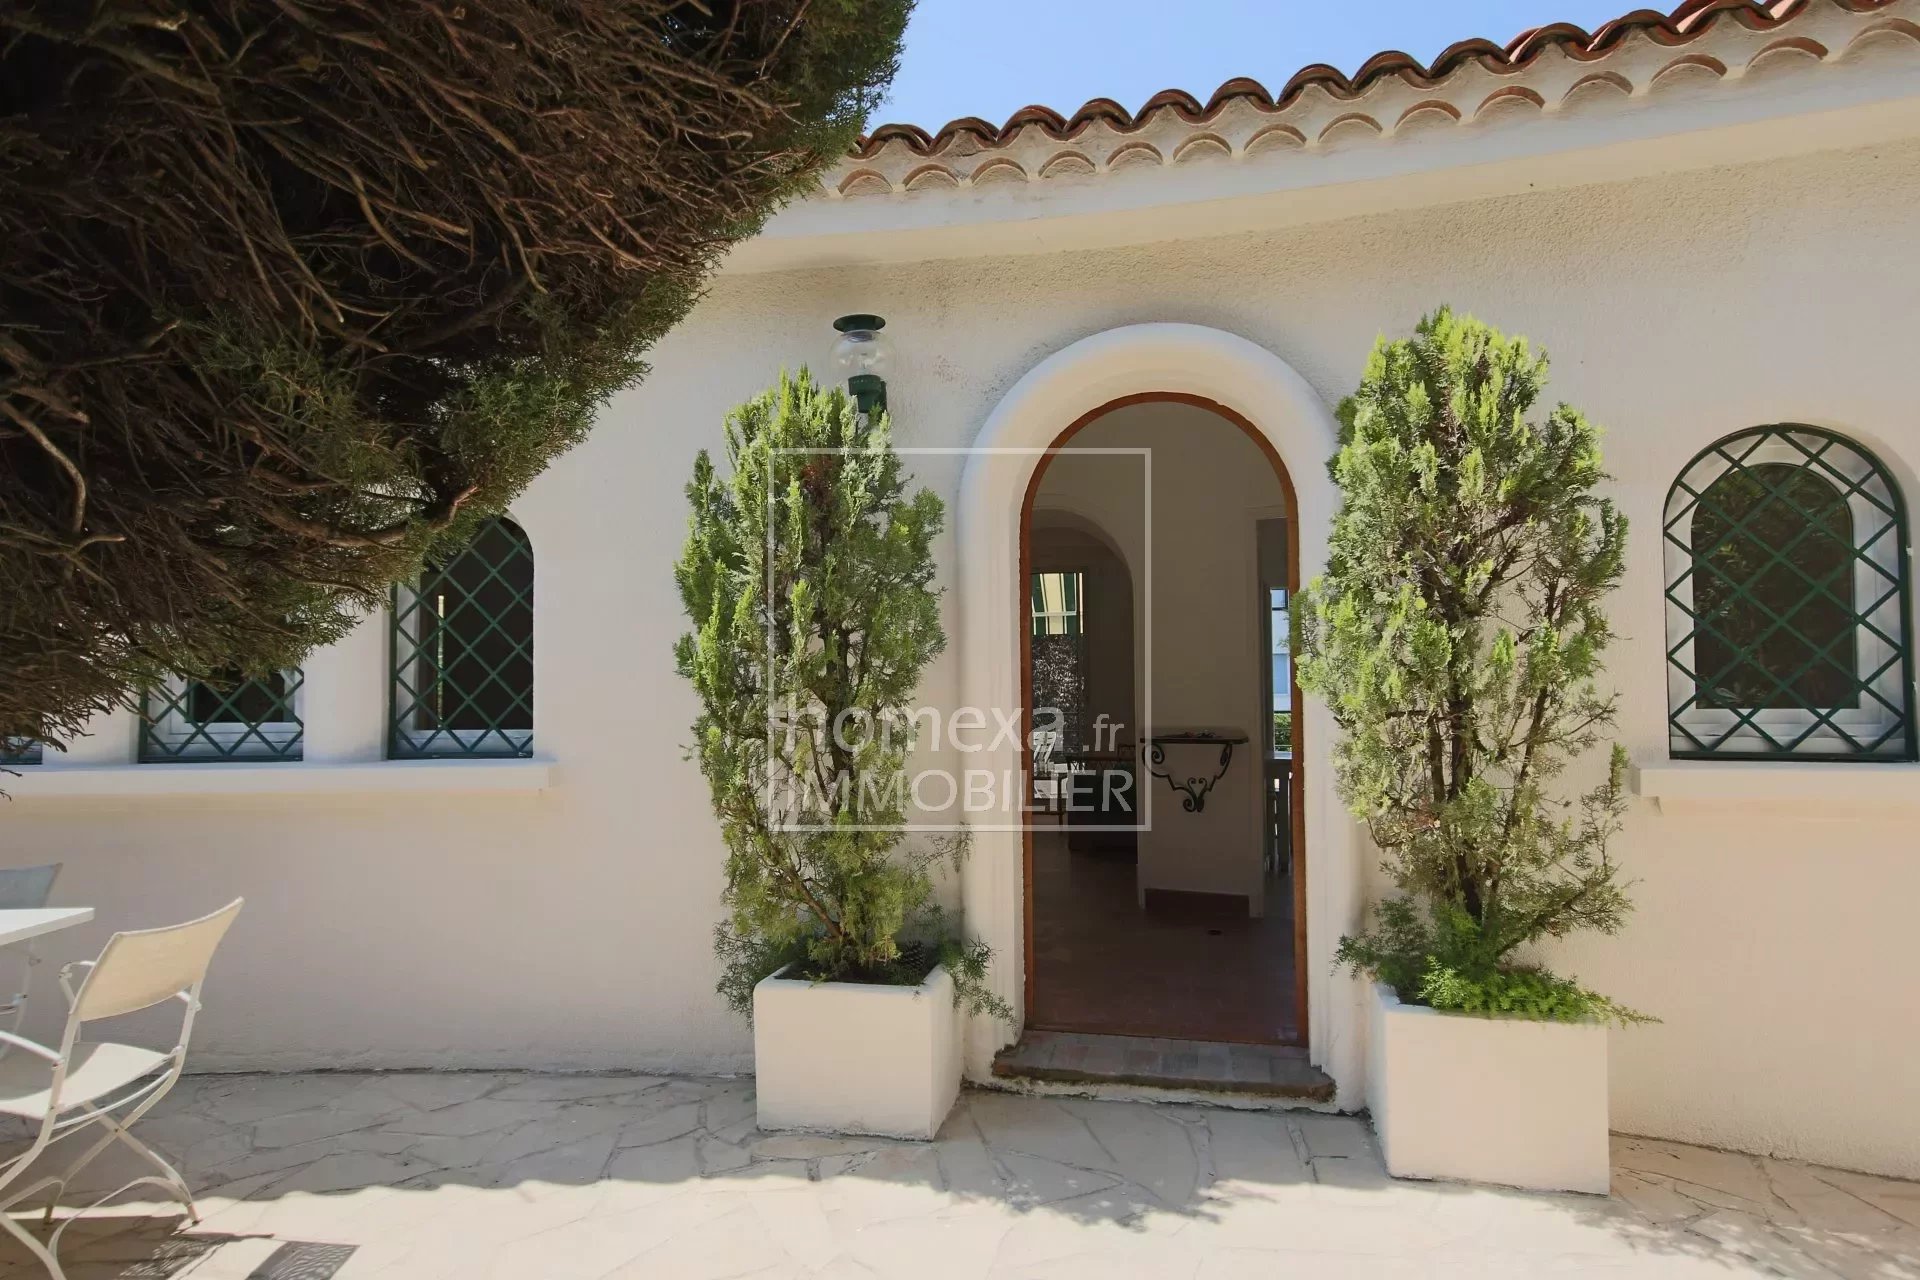 Antibes for rent house